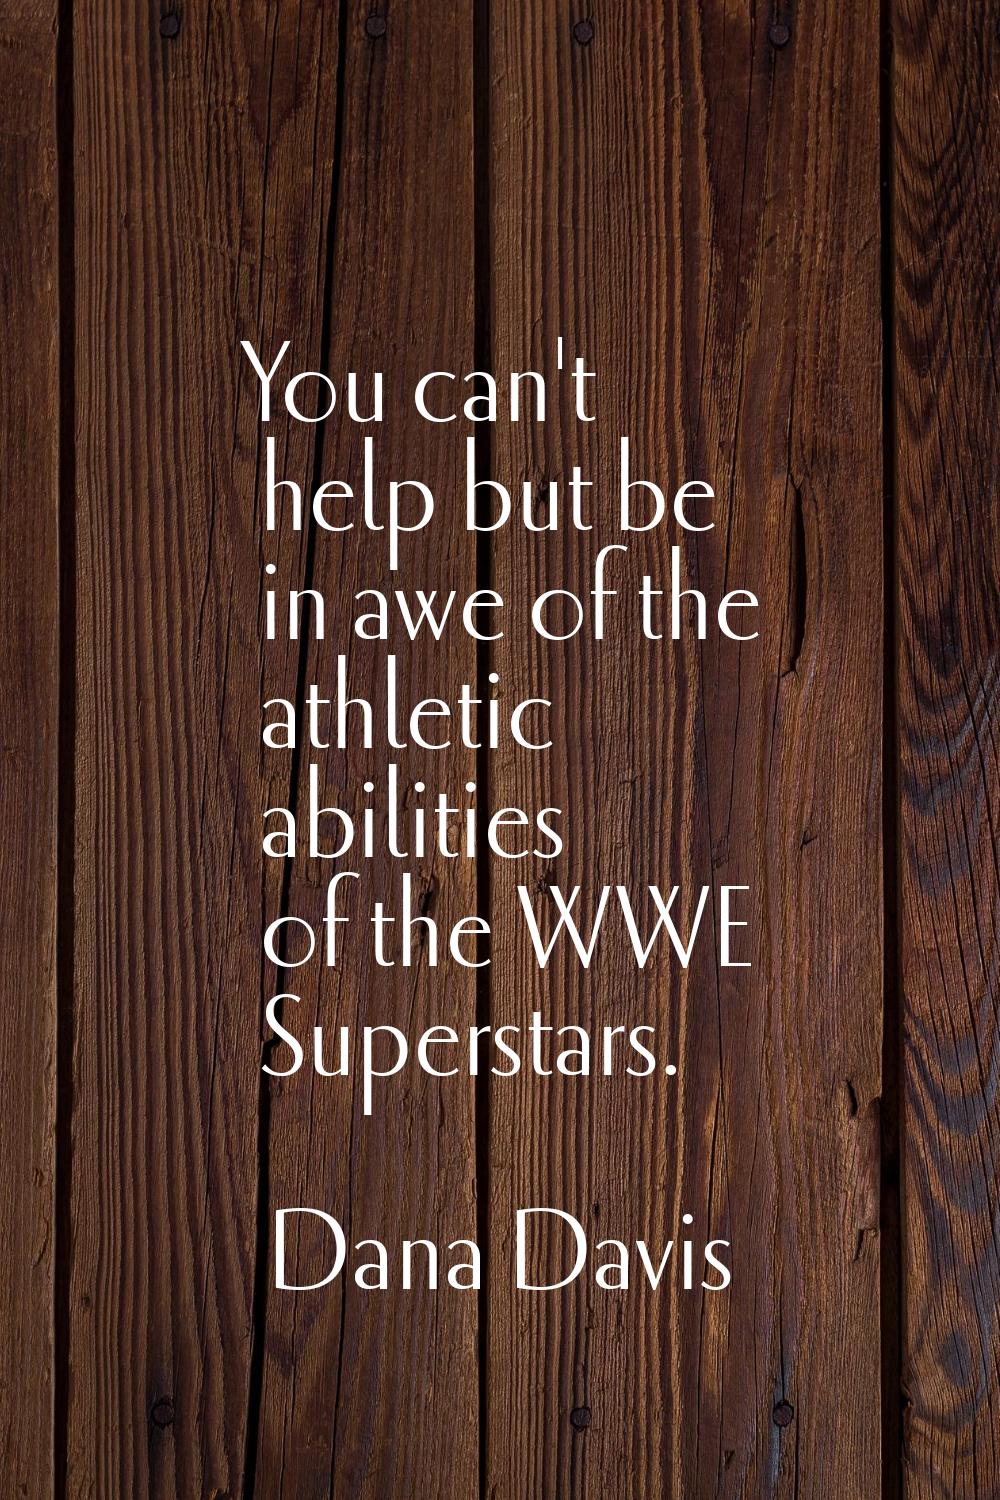 You can't help but be in awe of the athletic abilities of the WWE Superstars.